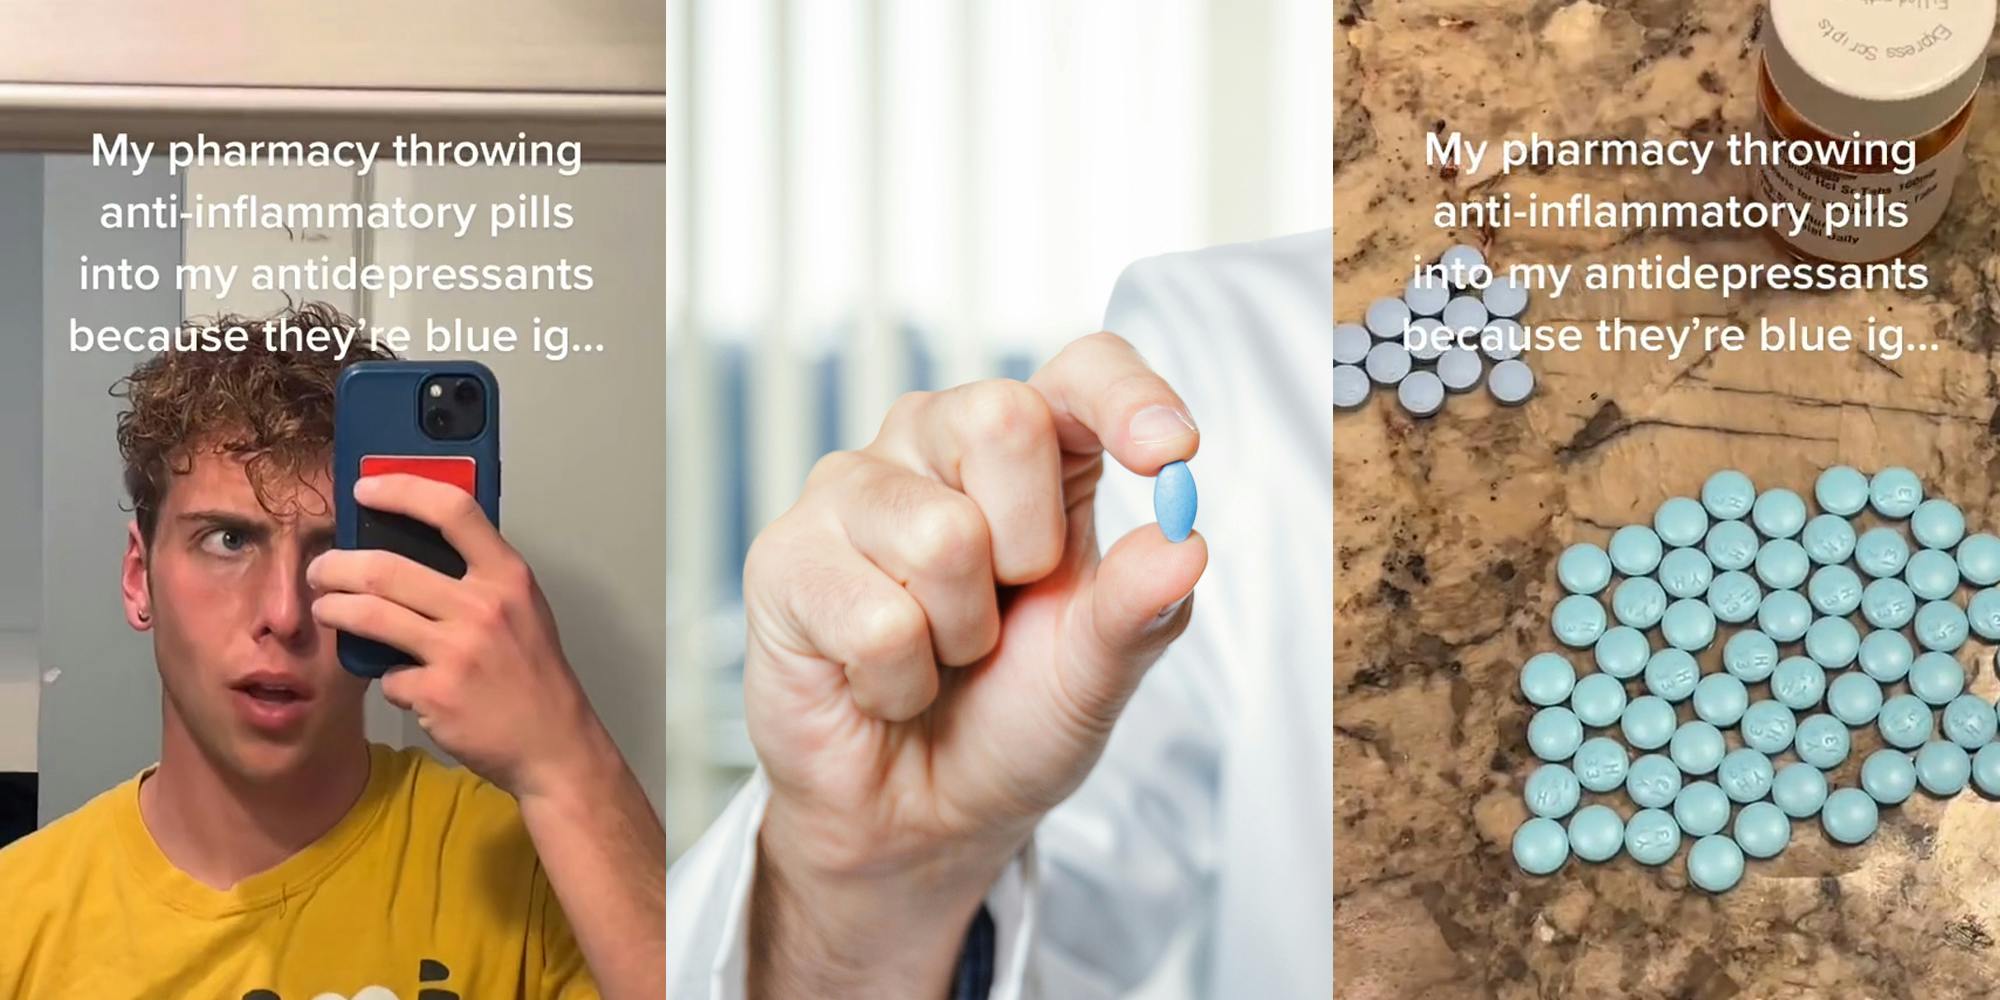 person speaking in mirror with caption "My pharmacy throwing anti-inflammatory pills into my antidepressants because they're blue ig..." (l) pharmacy tech holding blue pill (c) blue pills on counter with caption with caption "My pharmacy throwing anti-inflammatory pills into my antidepressants because they're blue ig..." (r)